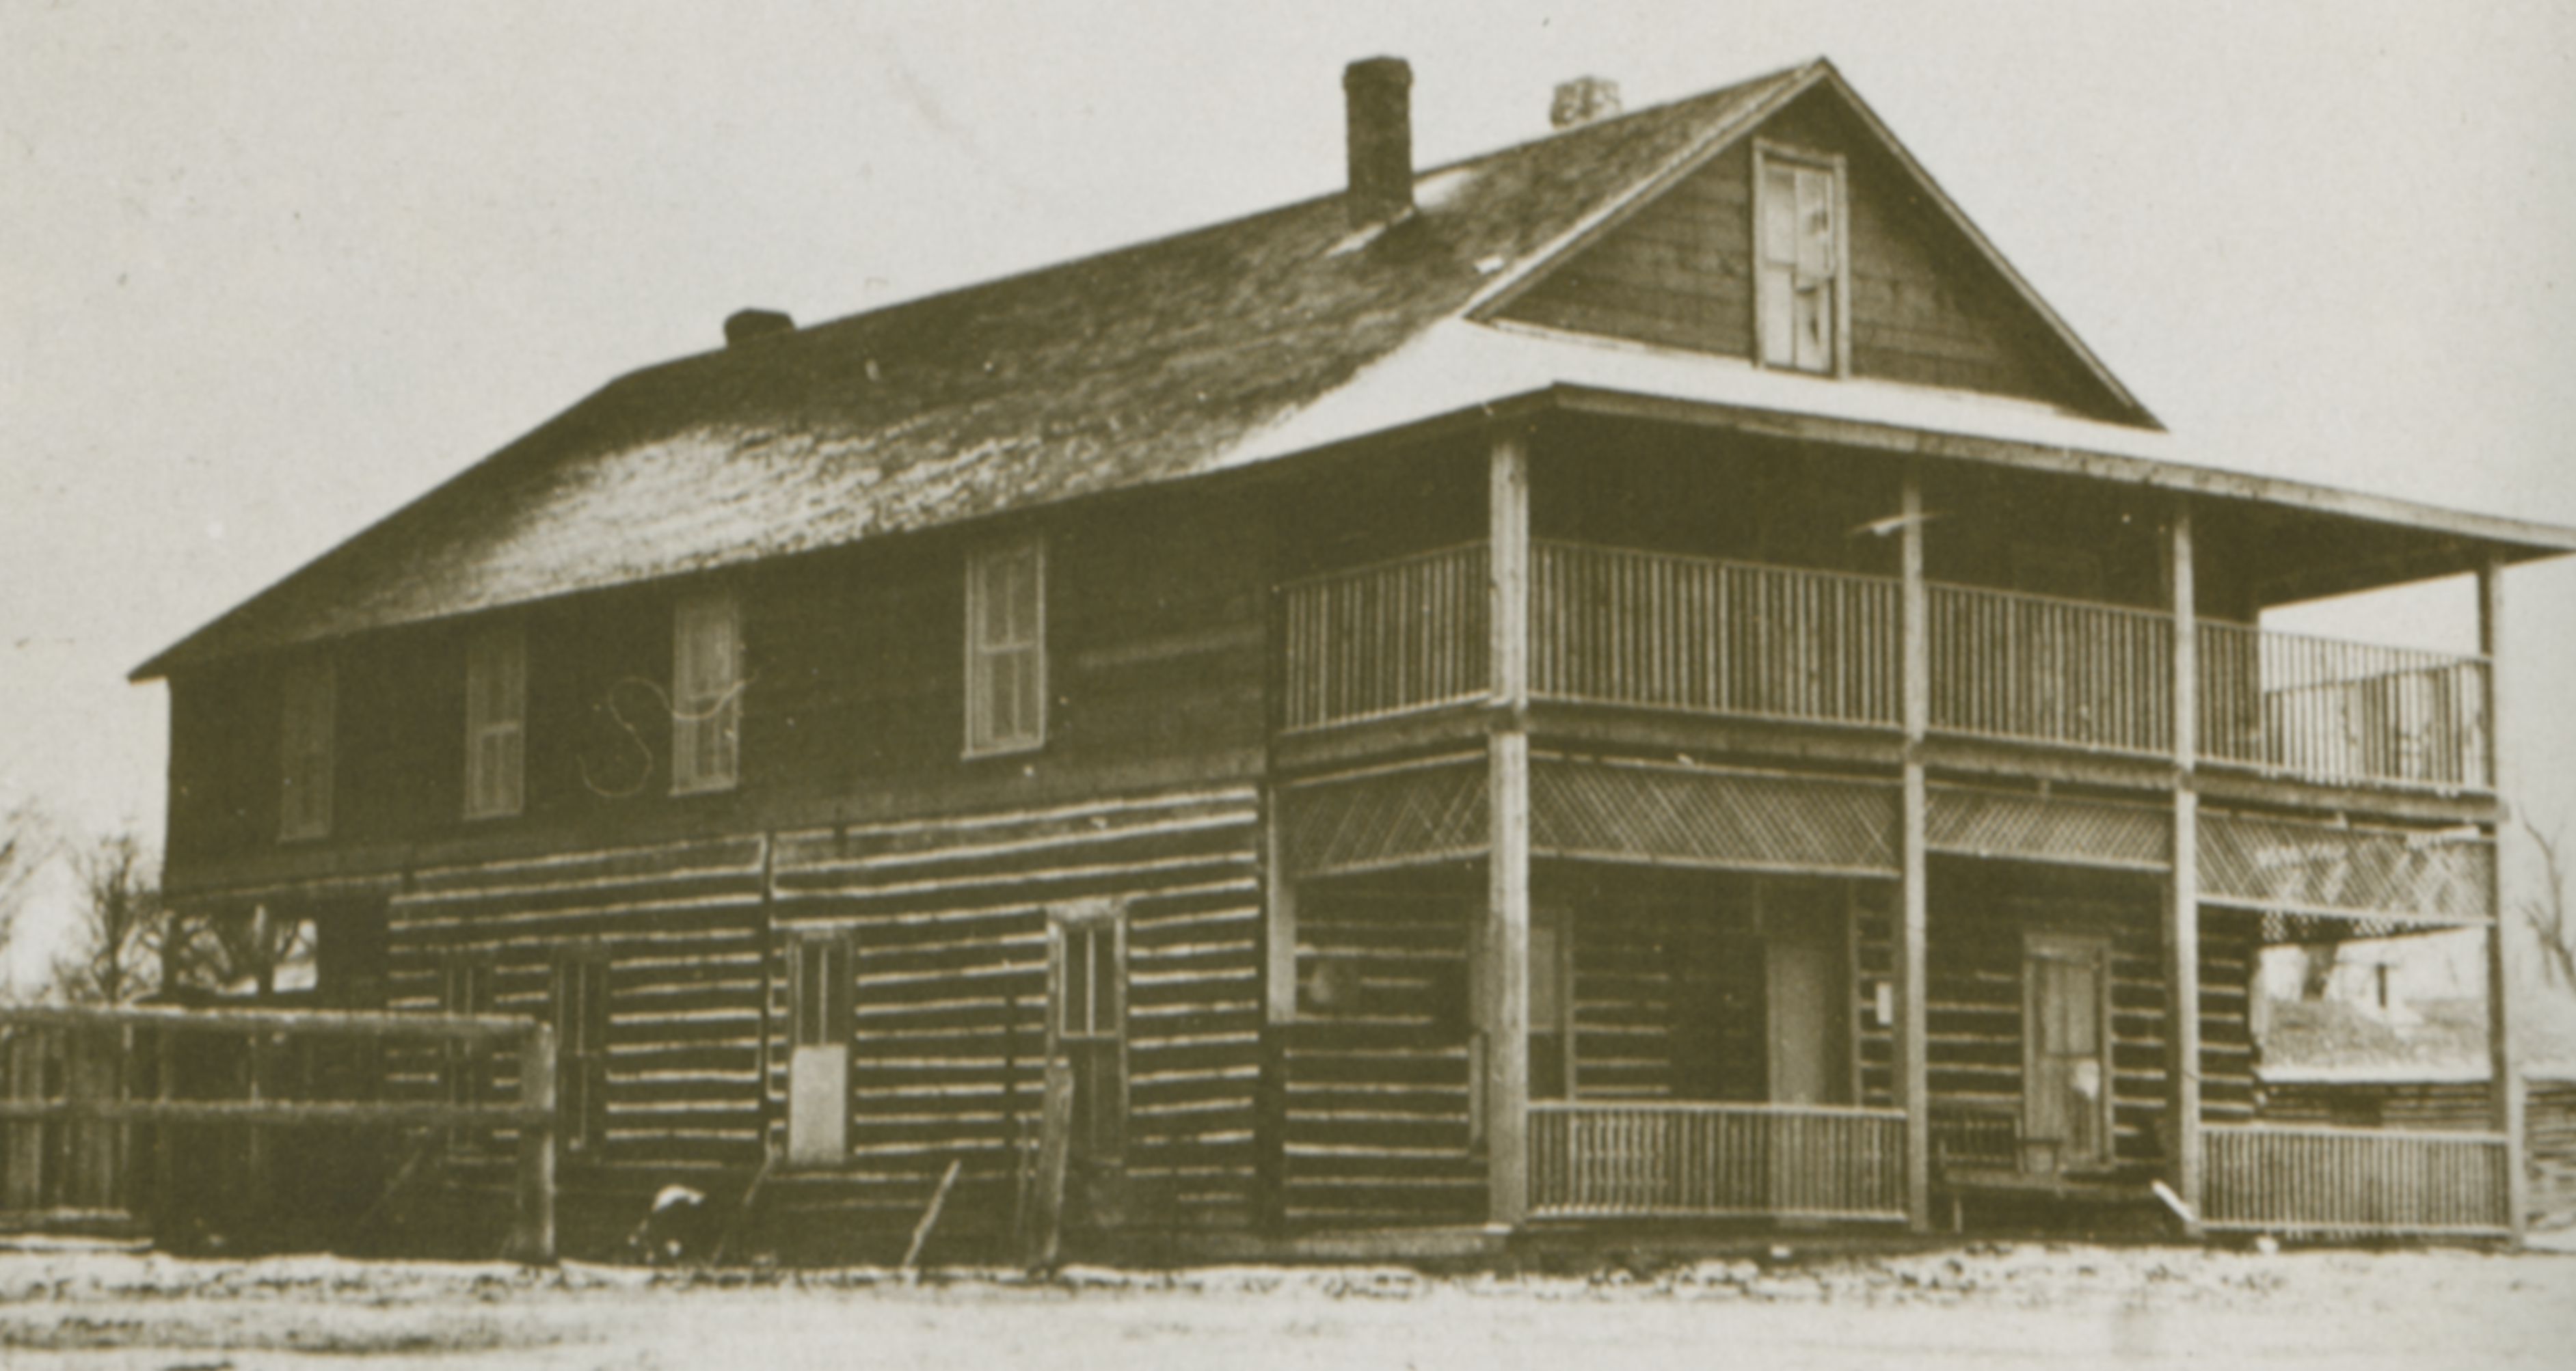 Photo of a two-story log home, with covered porches on the short end of this rectangular building. It has a simple pitched roof from which the chimney stands. The log structure has several small window on both floors  and on the two sides of the home that are visible. The yard has fencing, separating land to the rear of the house from the front yard area. A dusting of snow decorates portions of the rooftop.